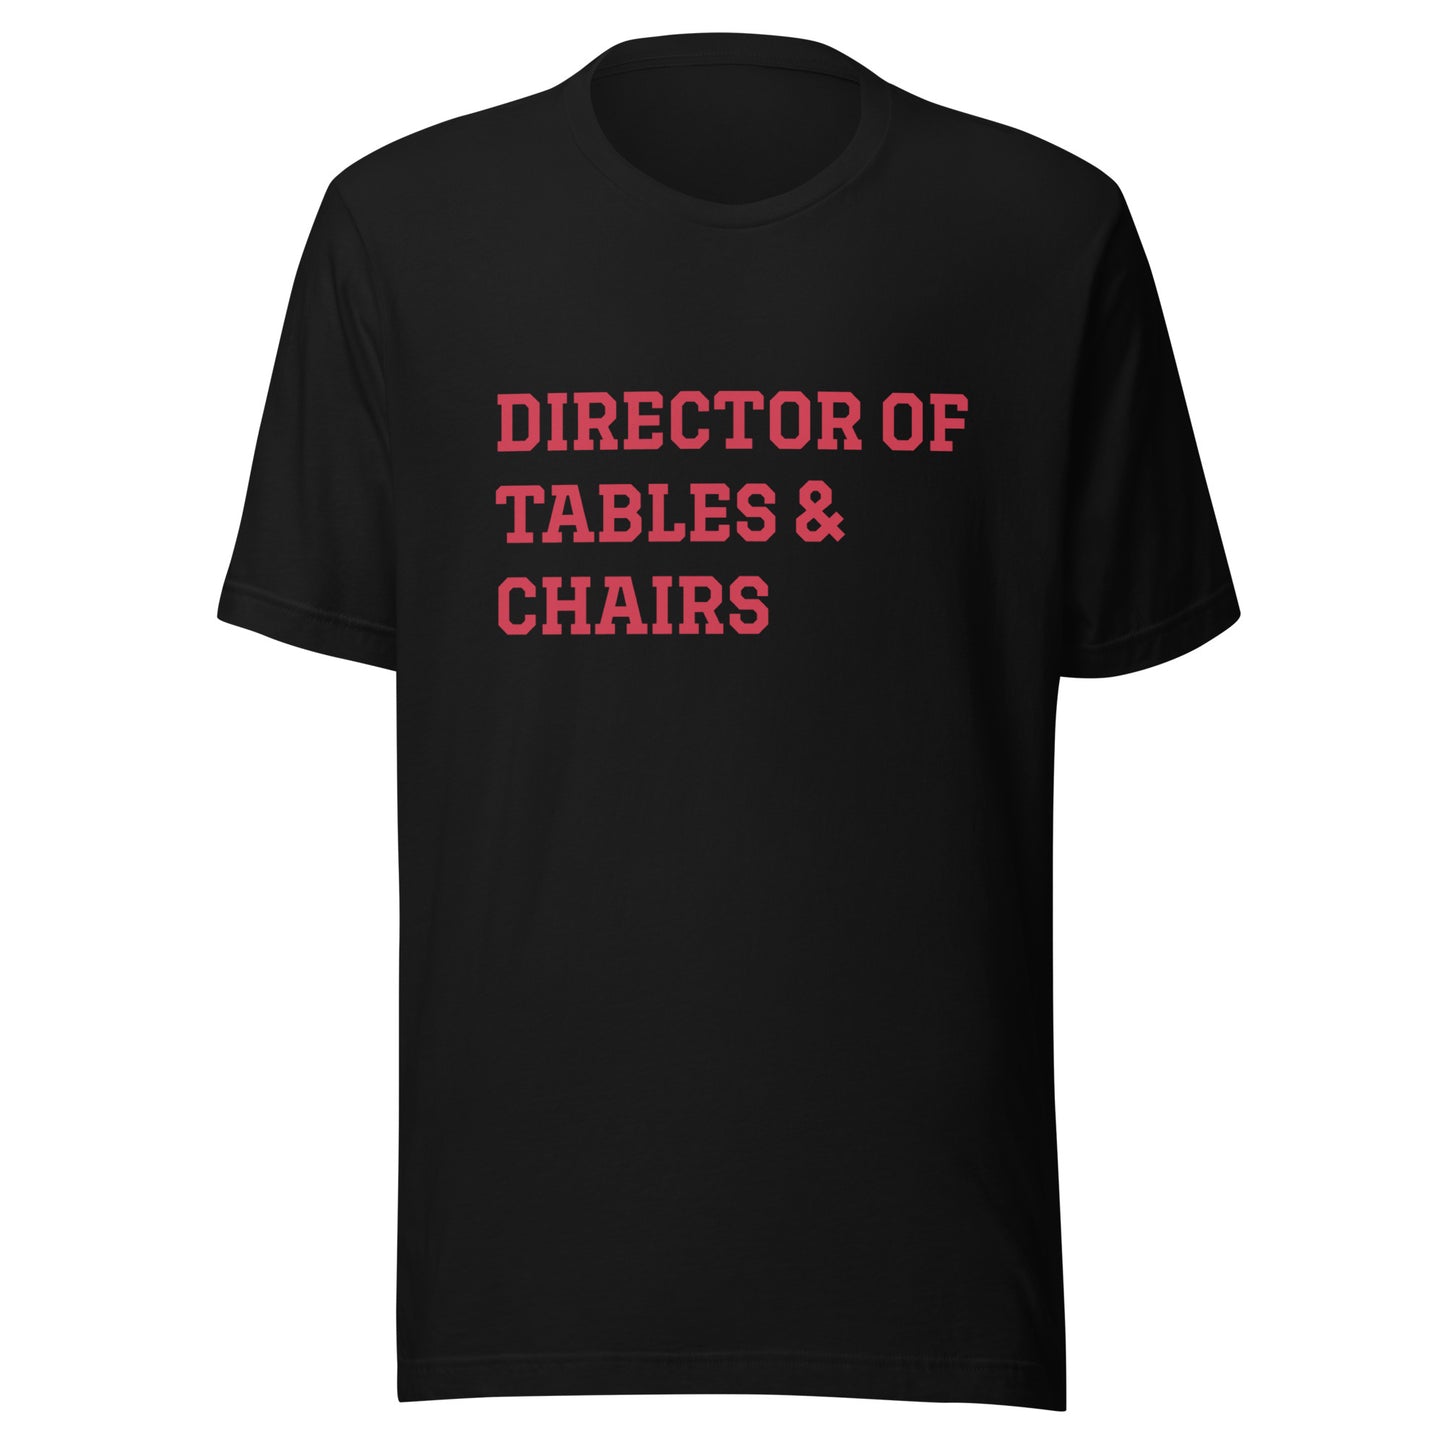 Director of Tables & Chairs